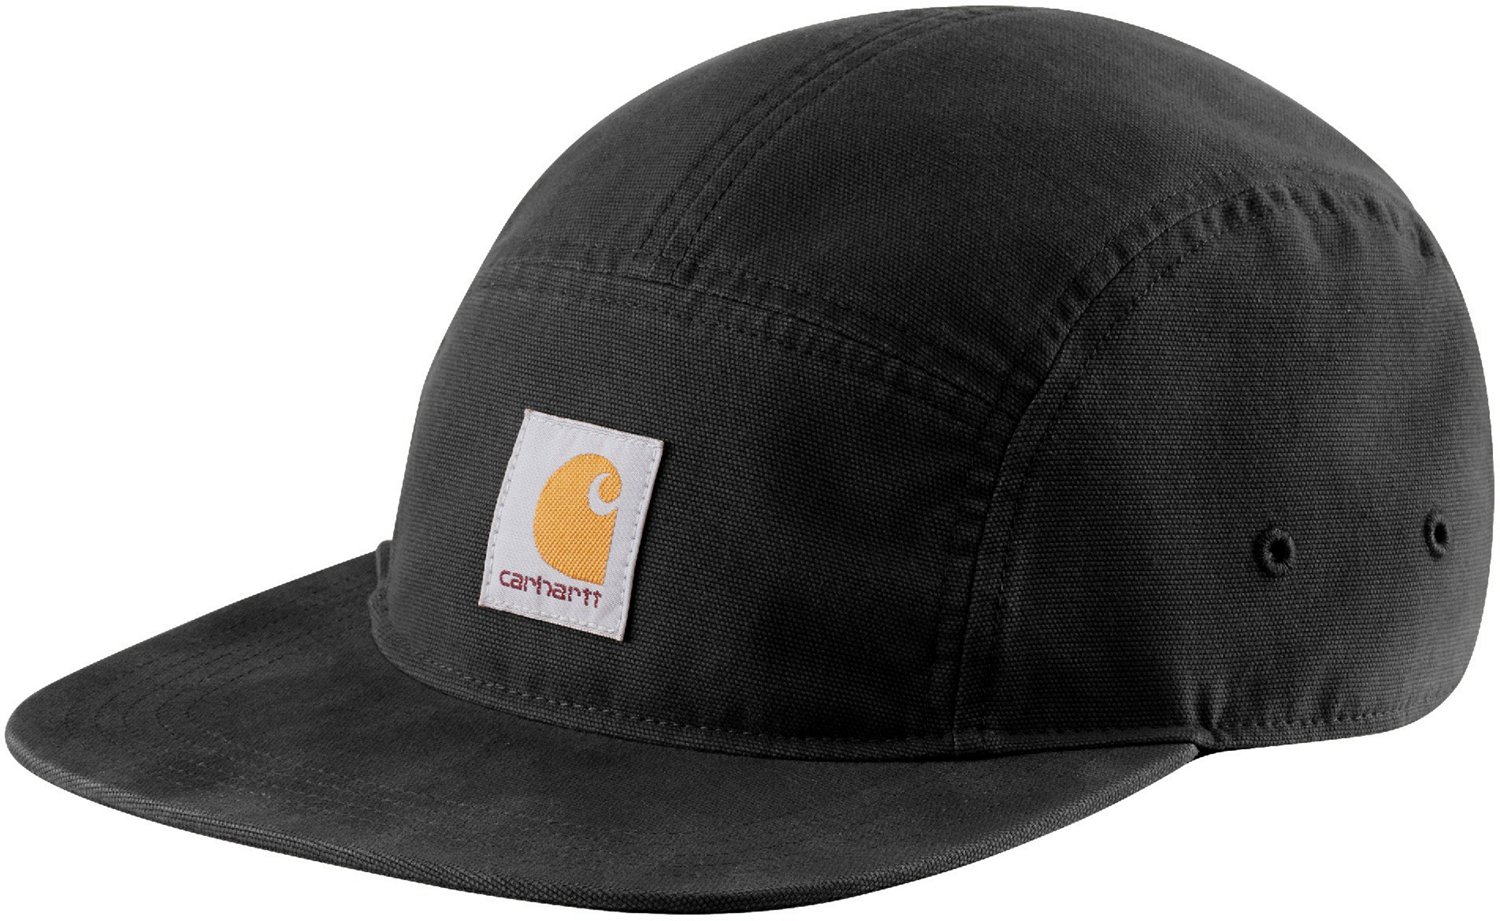 Carhartt Men's Canvas Five-Panel Cap | Free Shipping at Academy